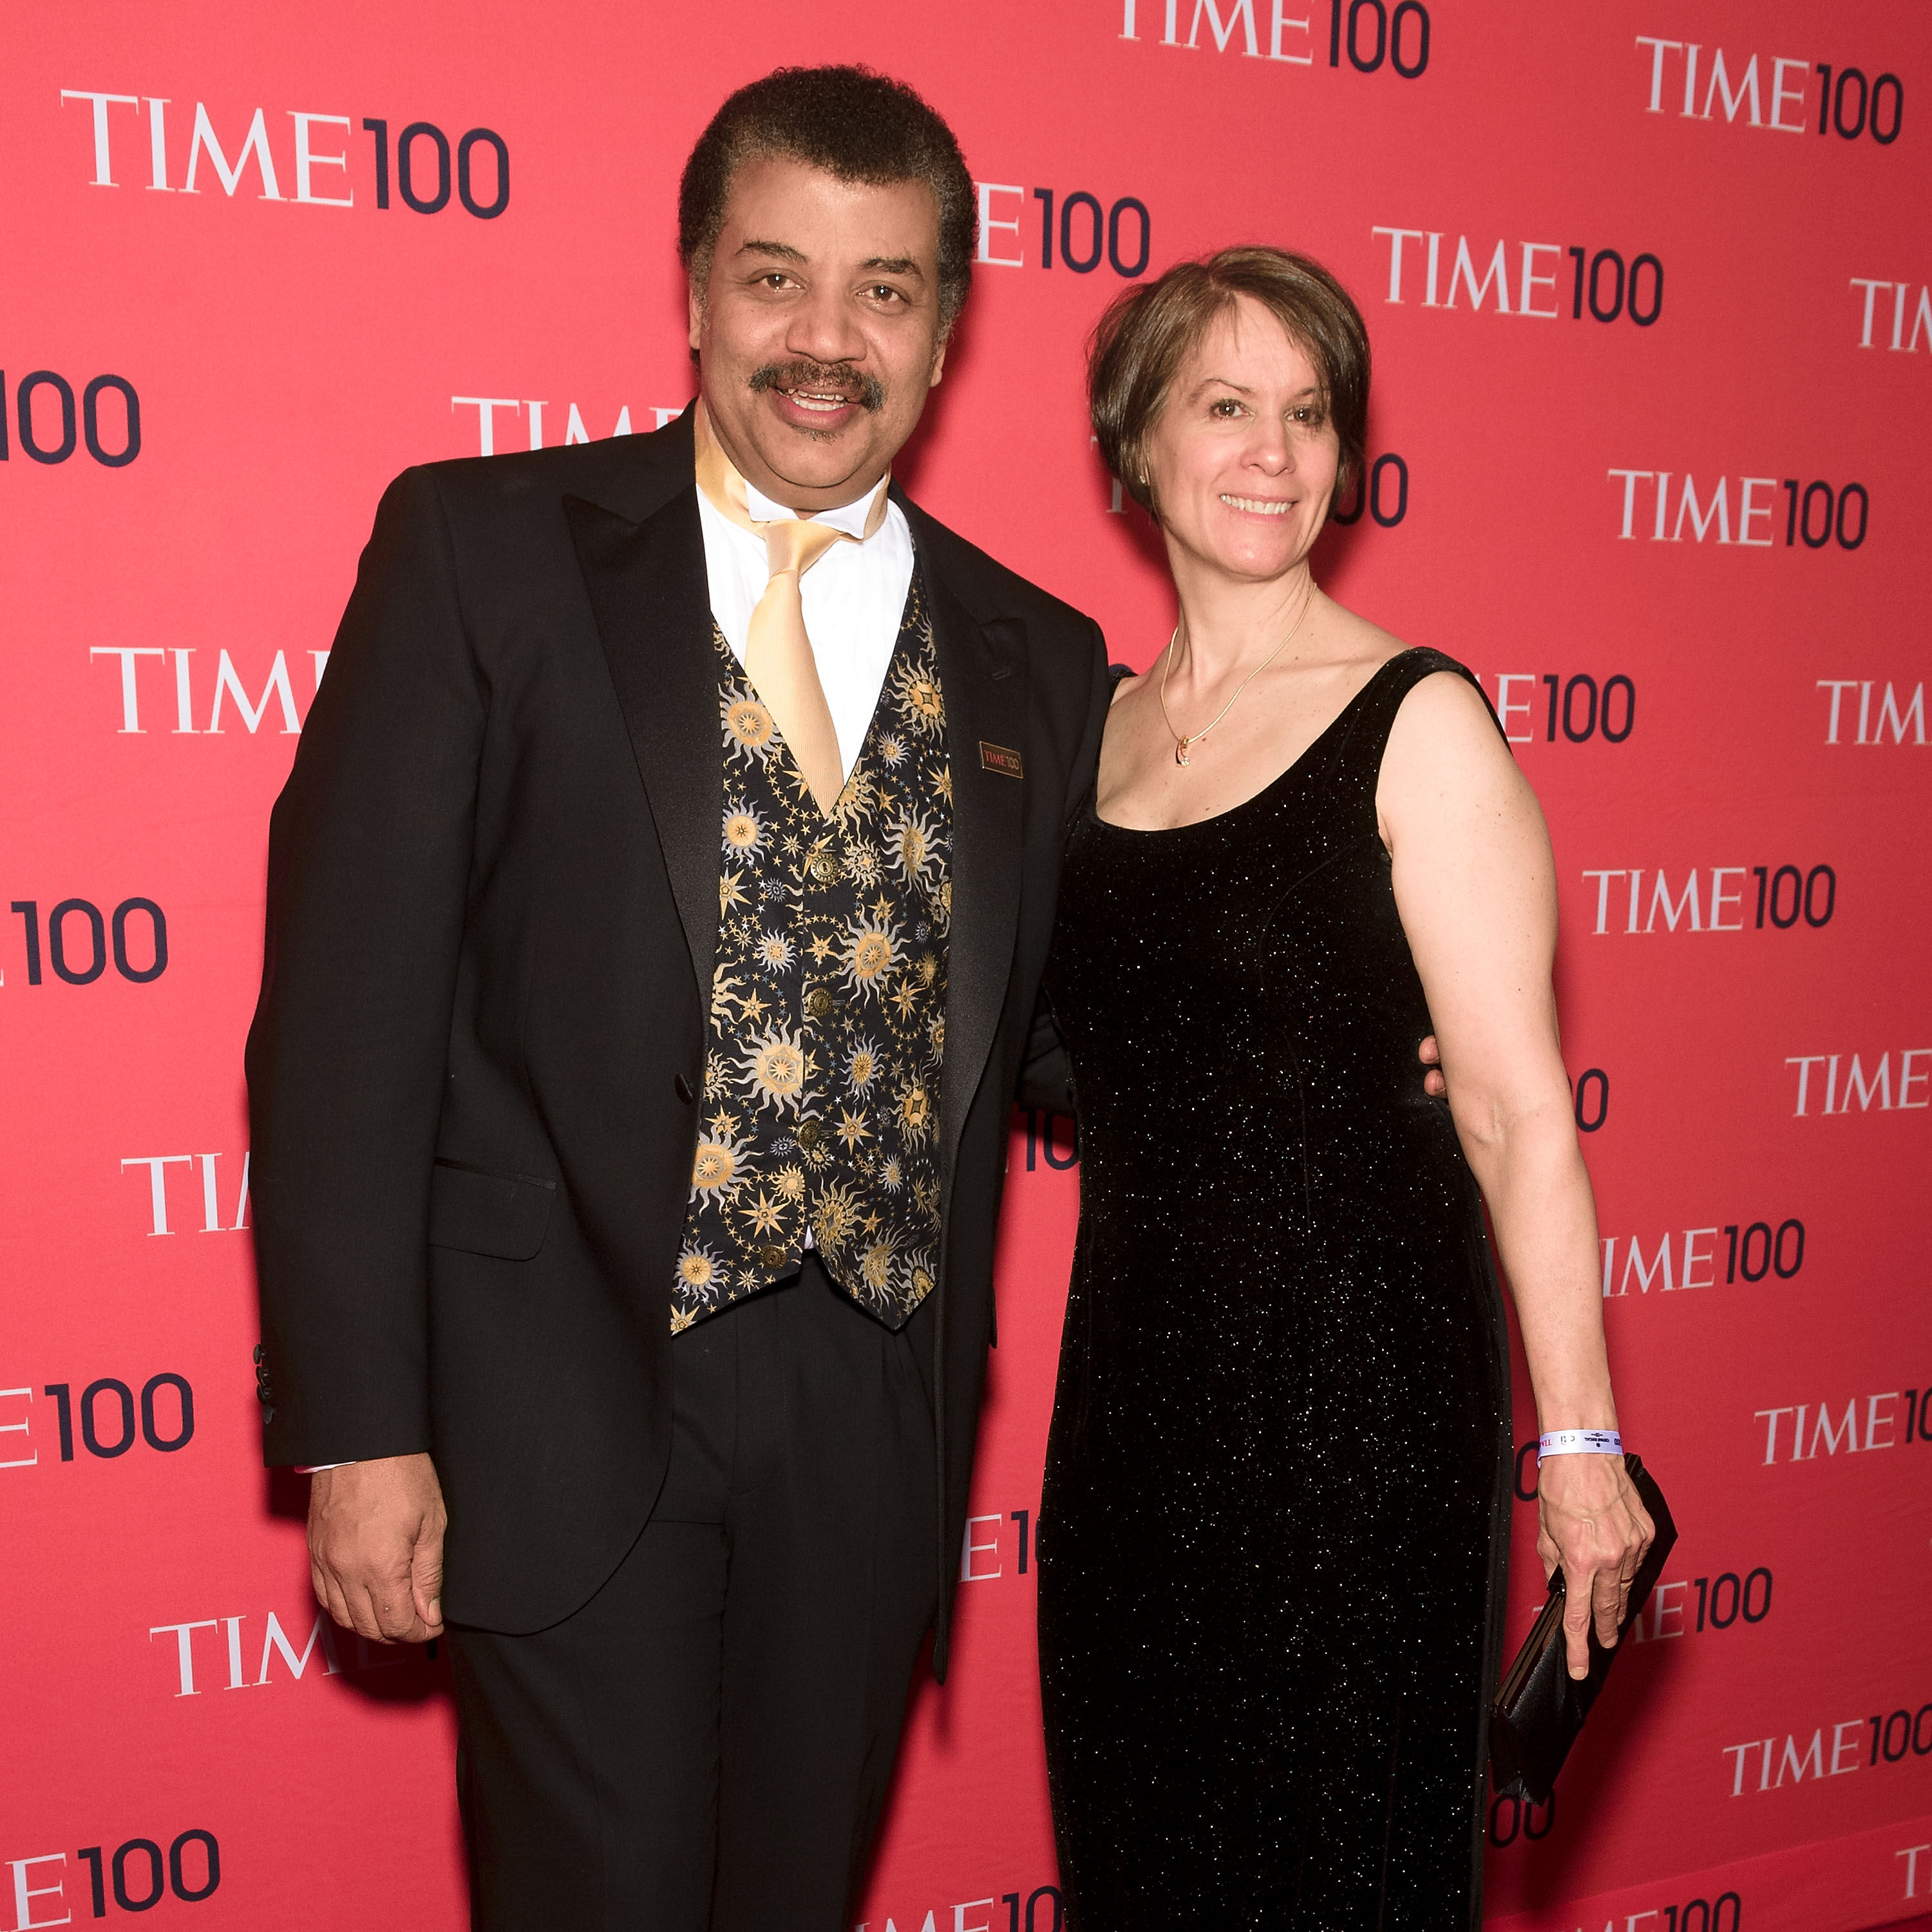 Neil deGrasse Tyson and Alice Young at the 2014 Time 100 Gala on April 29, 2014, in New York City. | Source: Getty Images